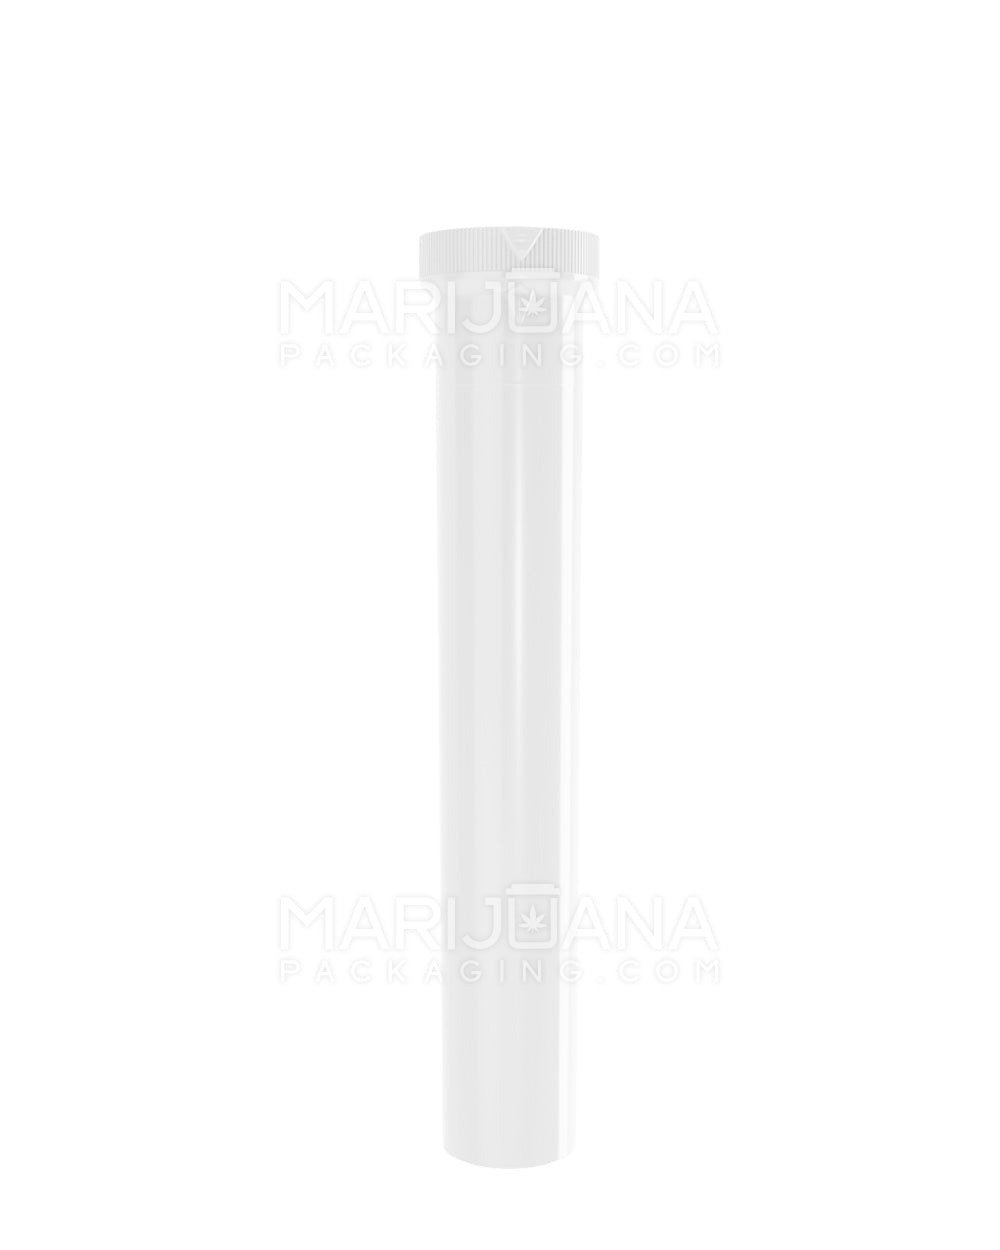 Child Resistant | King Size ‘Line-Up Arrow’ Pre-Roll Tubes | 116mm - Opaque White Plastic - 500 Count - 3